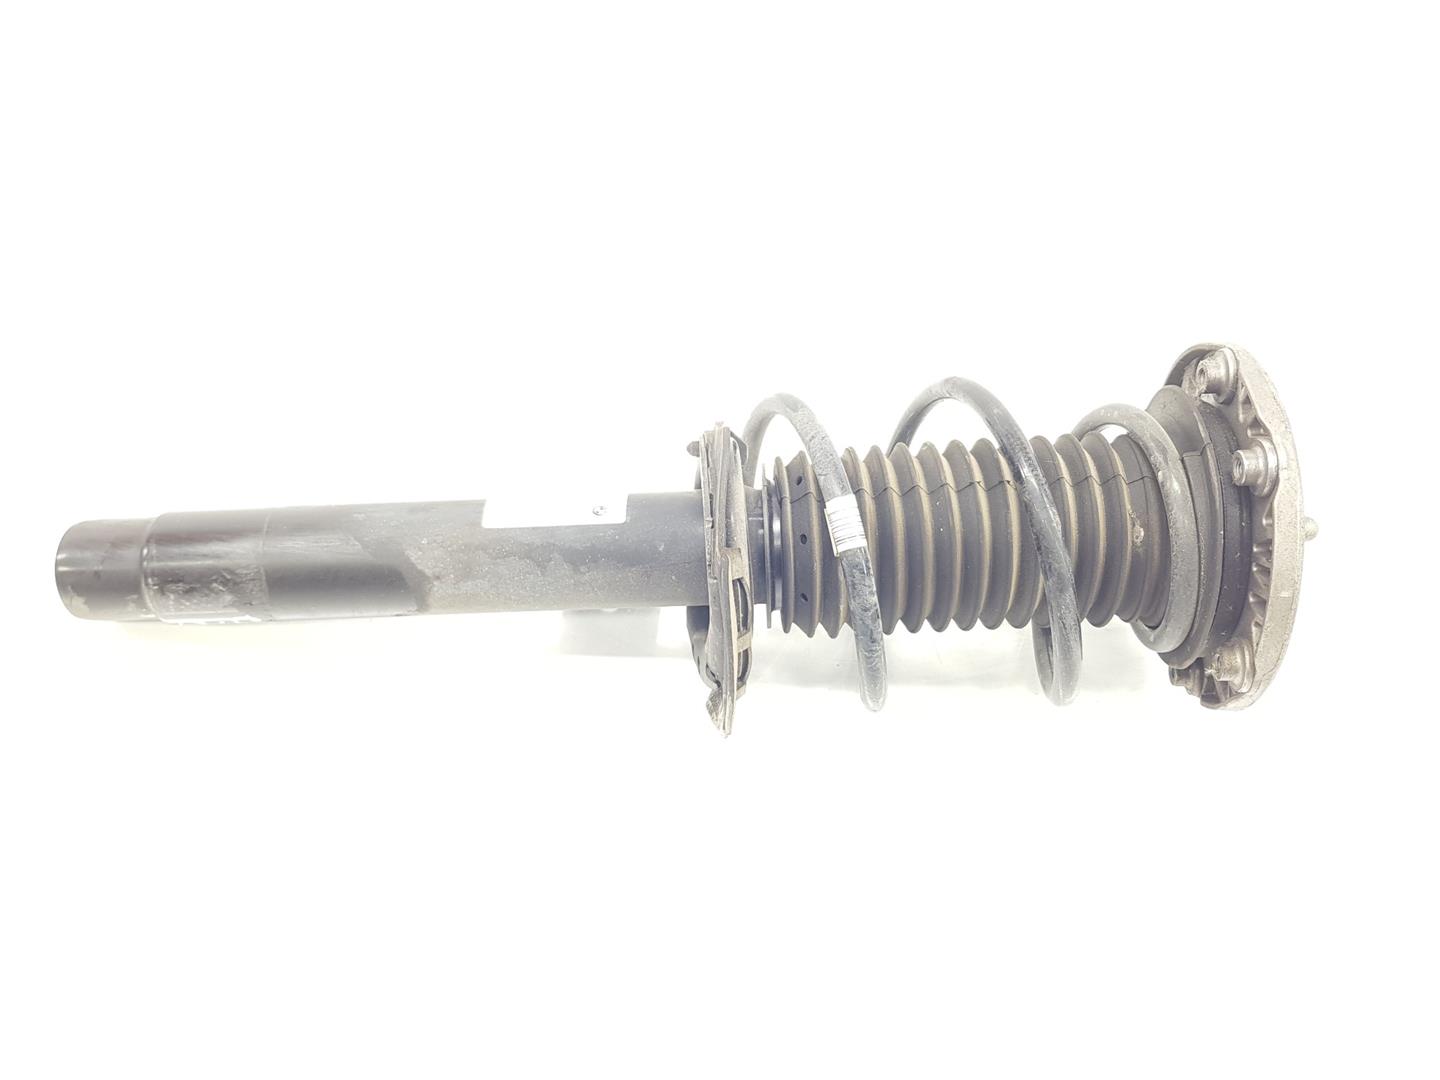 BMW 1 Series F20/F21 (2011-2020) Front Right Shock Absorber 6873723, 31316873723 24245544